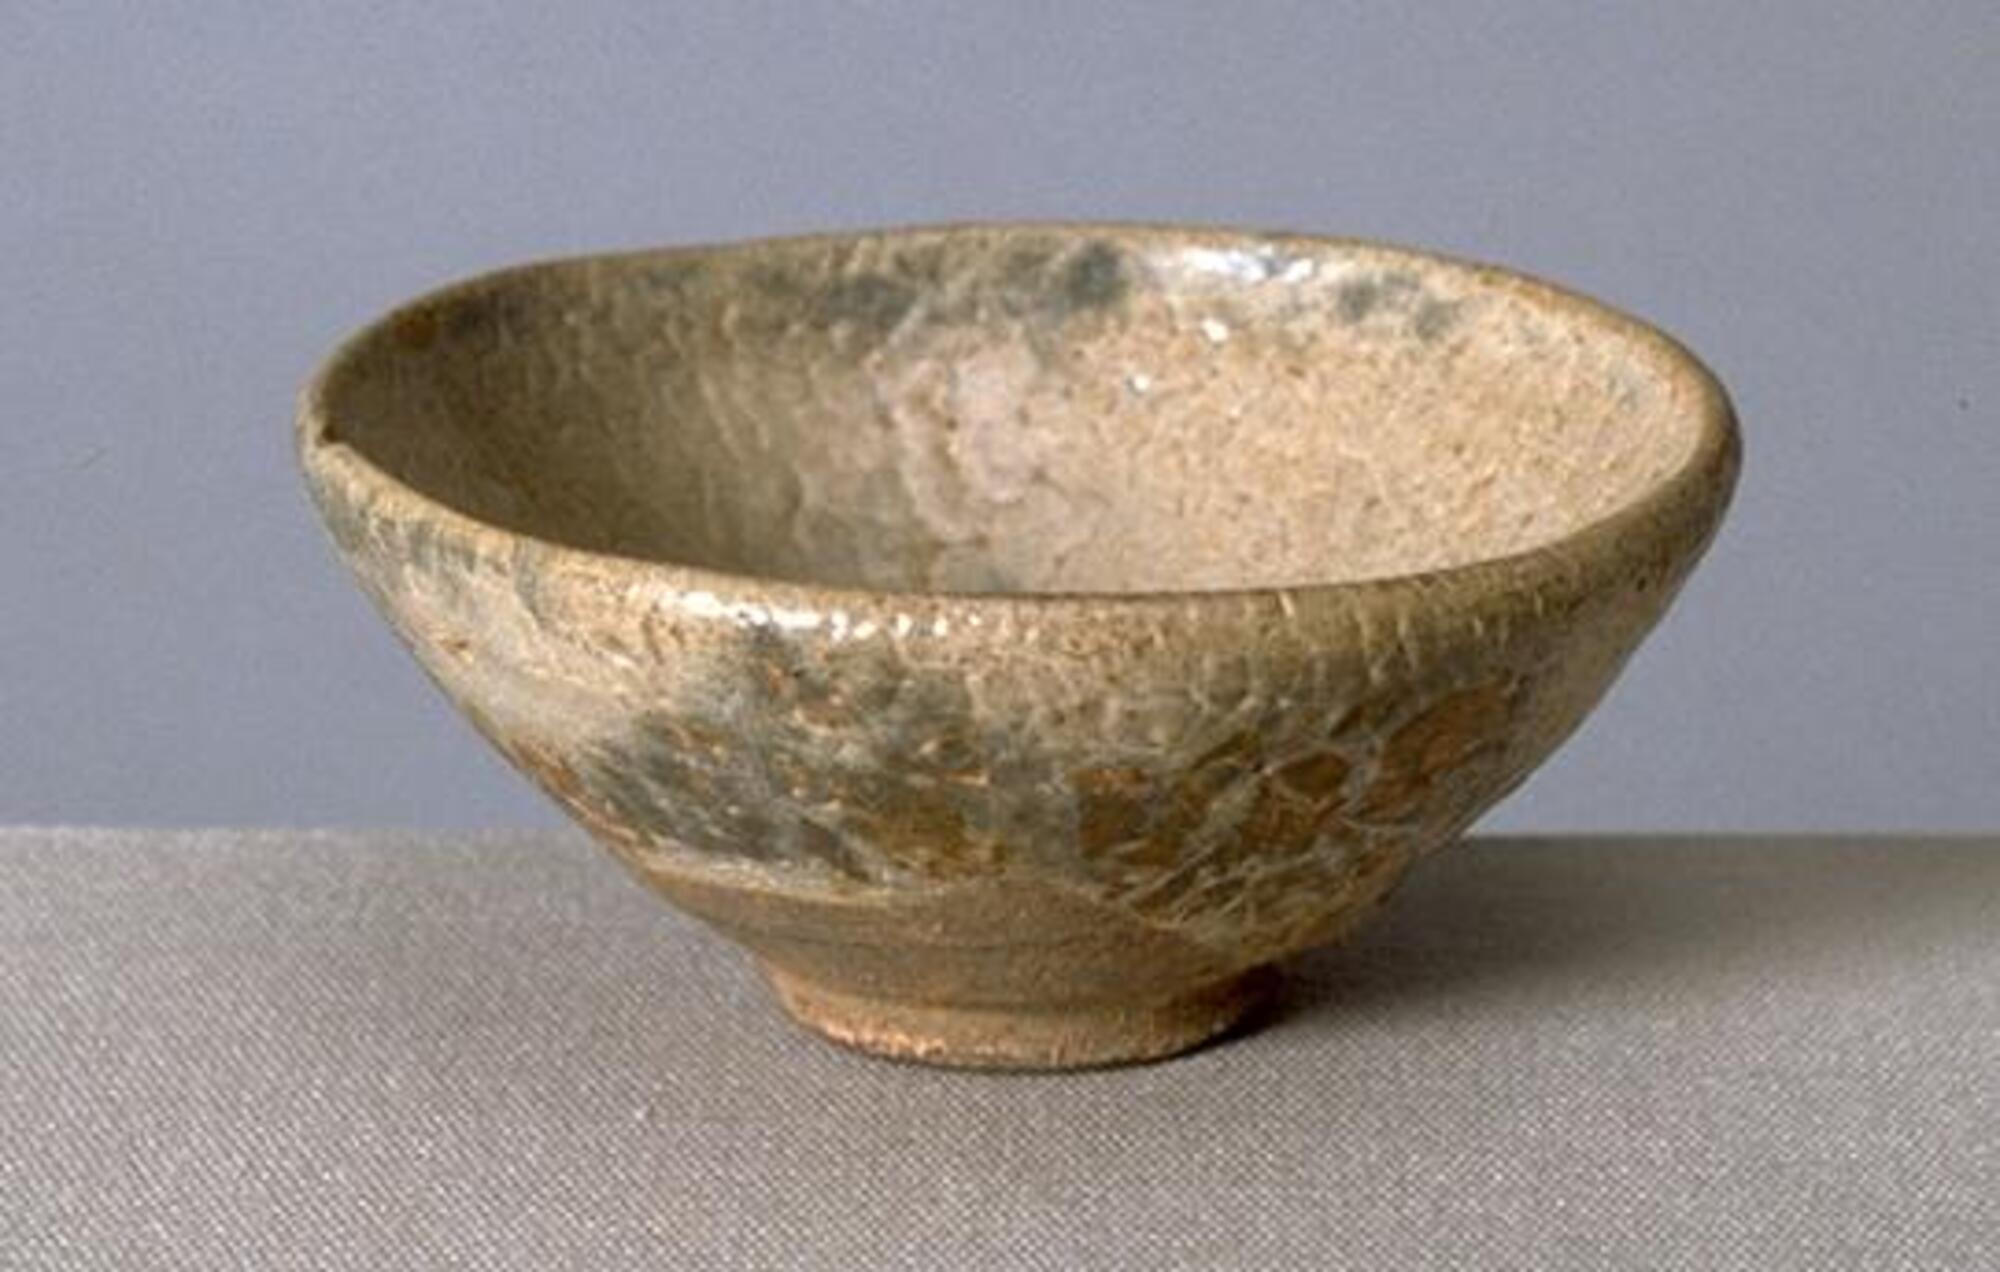 A small round bowl on a tall straight foot ring, made from brown stoneware covered in a thick brown glaze with gray mottling. The too-thick glaze is crawling away from the underlying clay body.